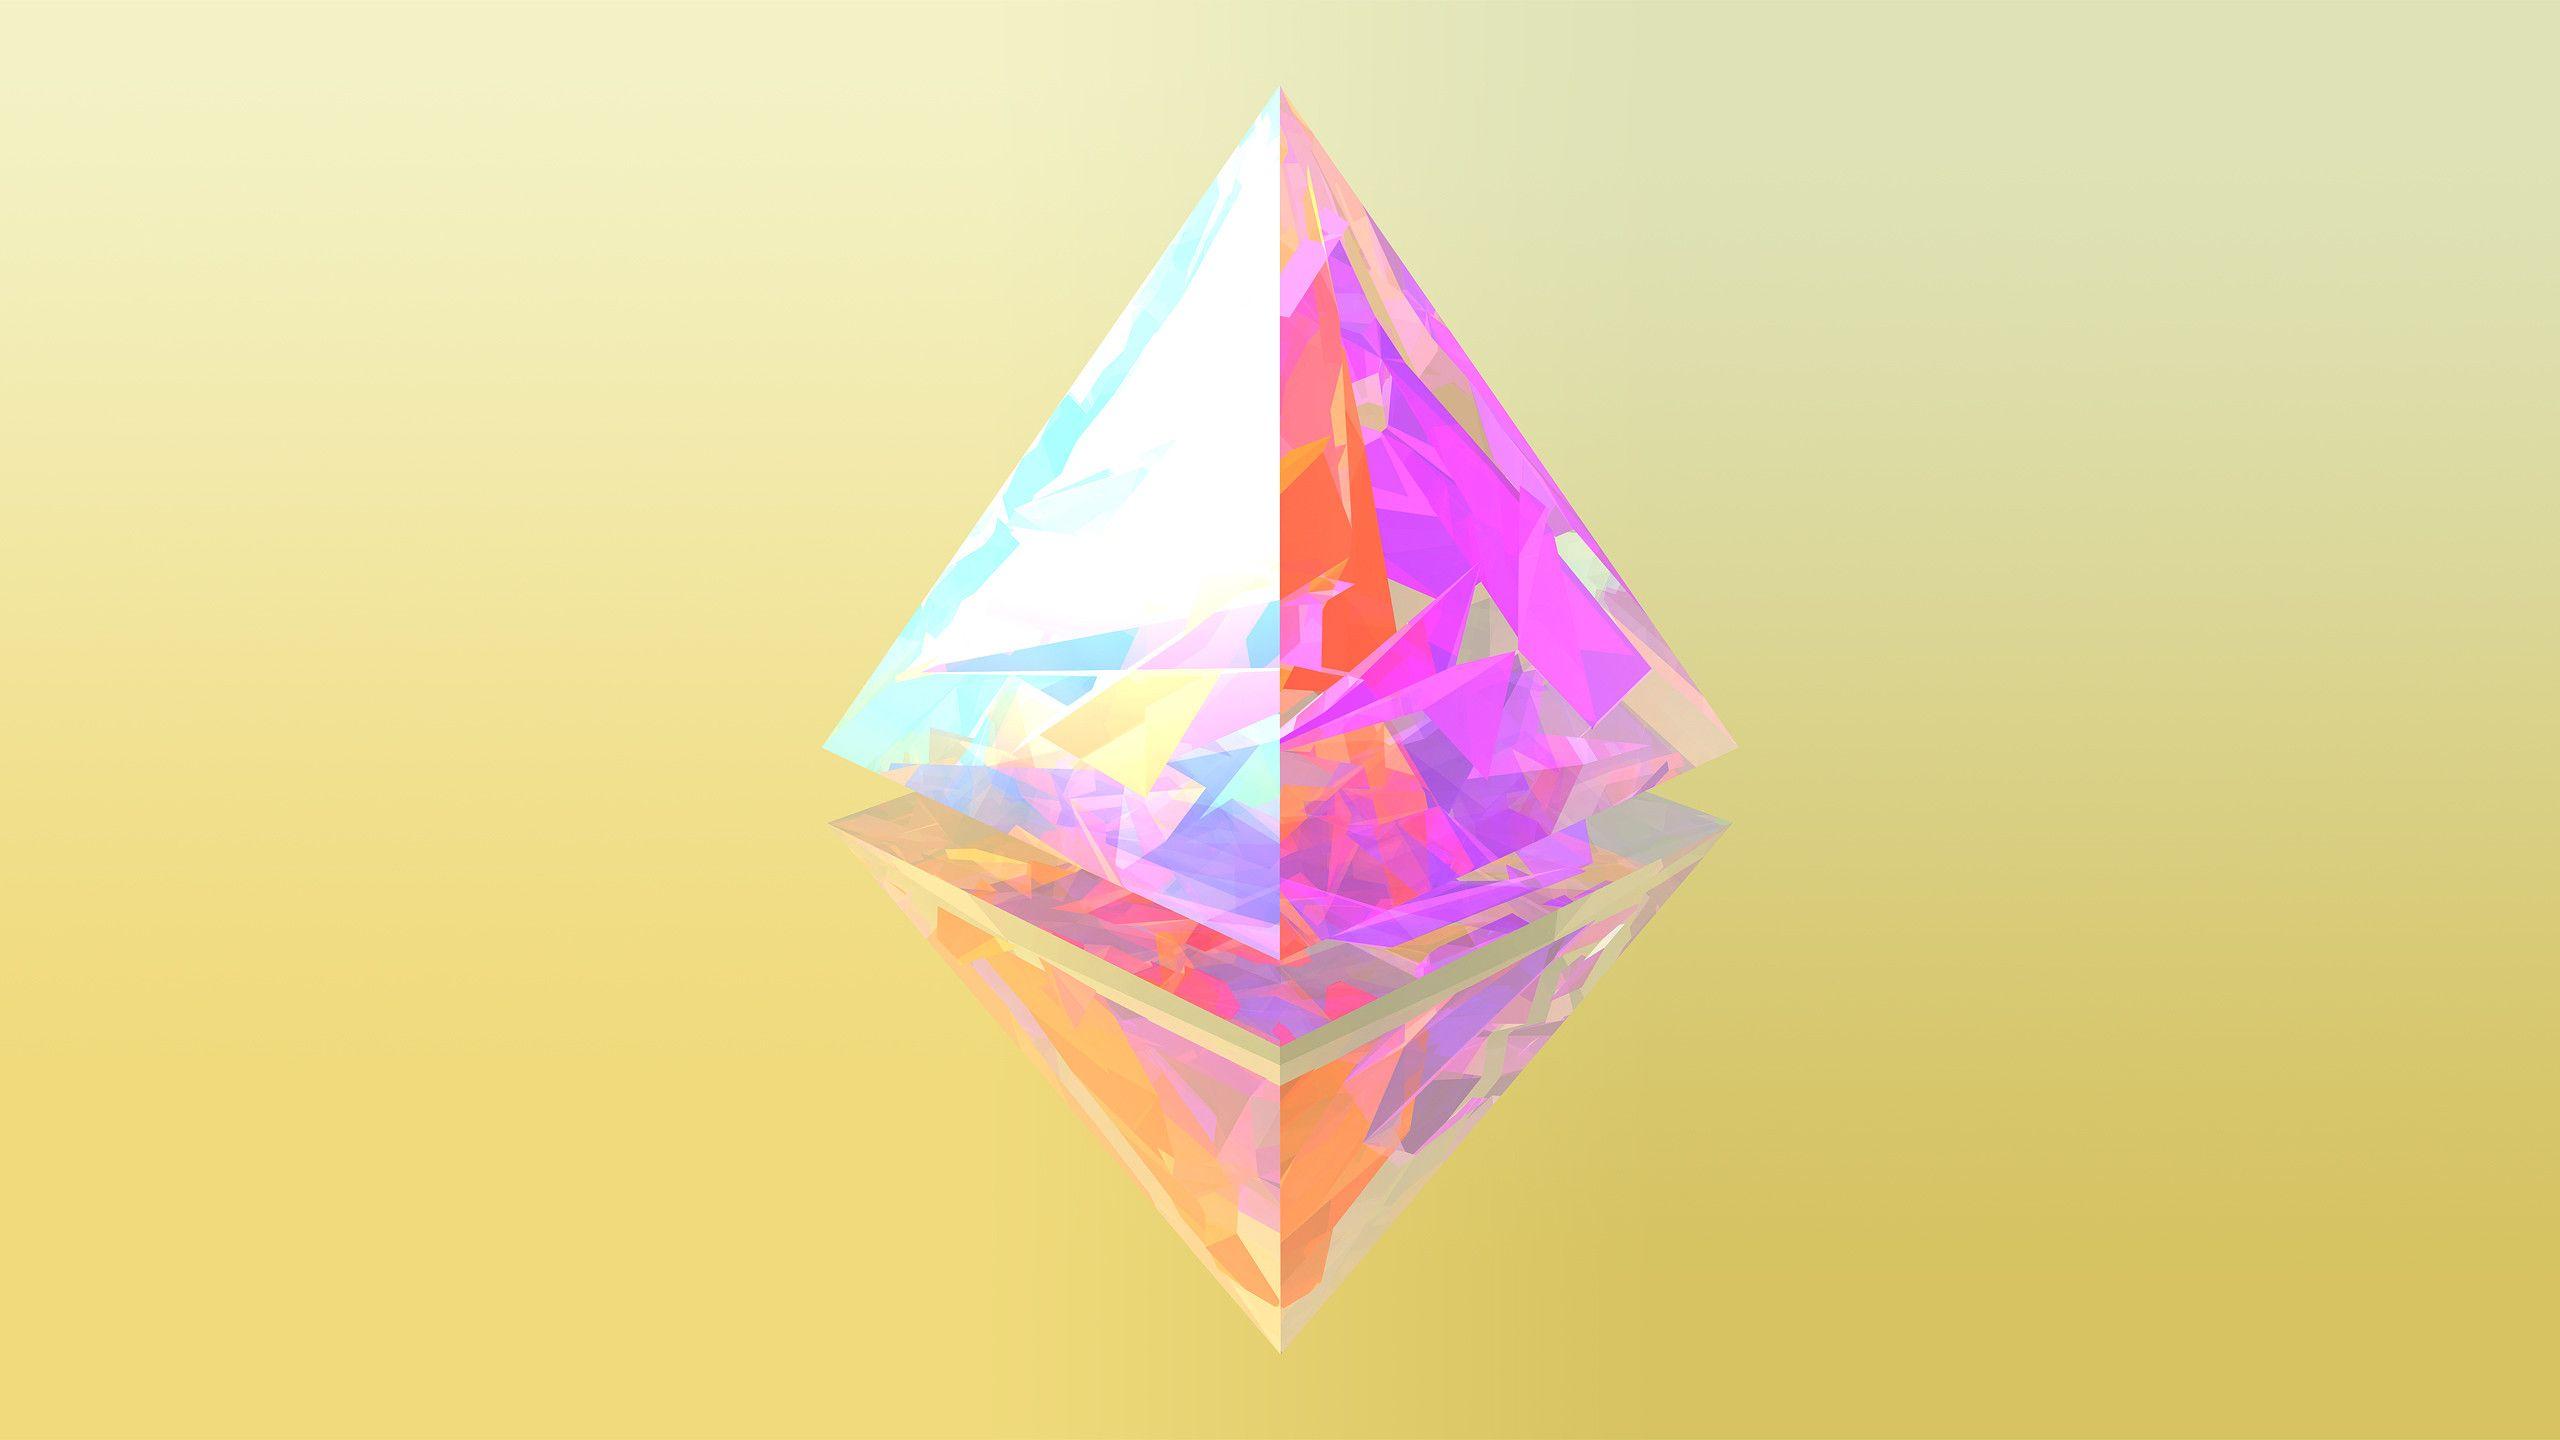 Found a great wallpapers if any one is interested. : ethereum